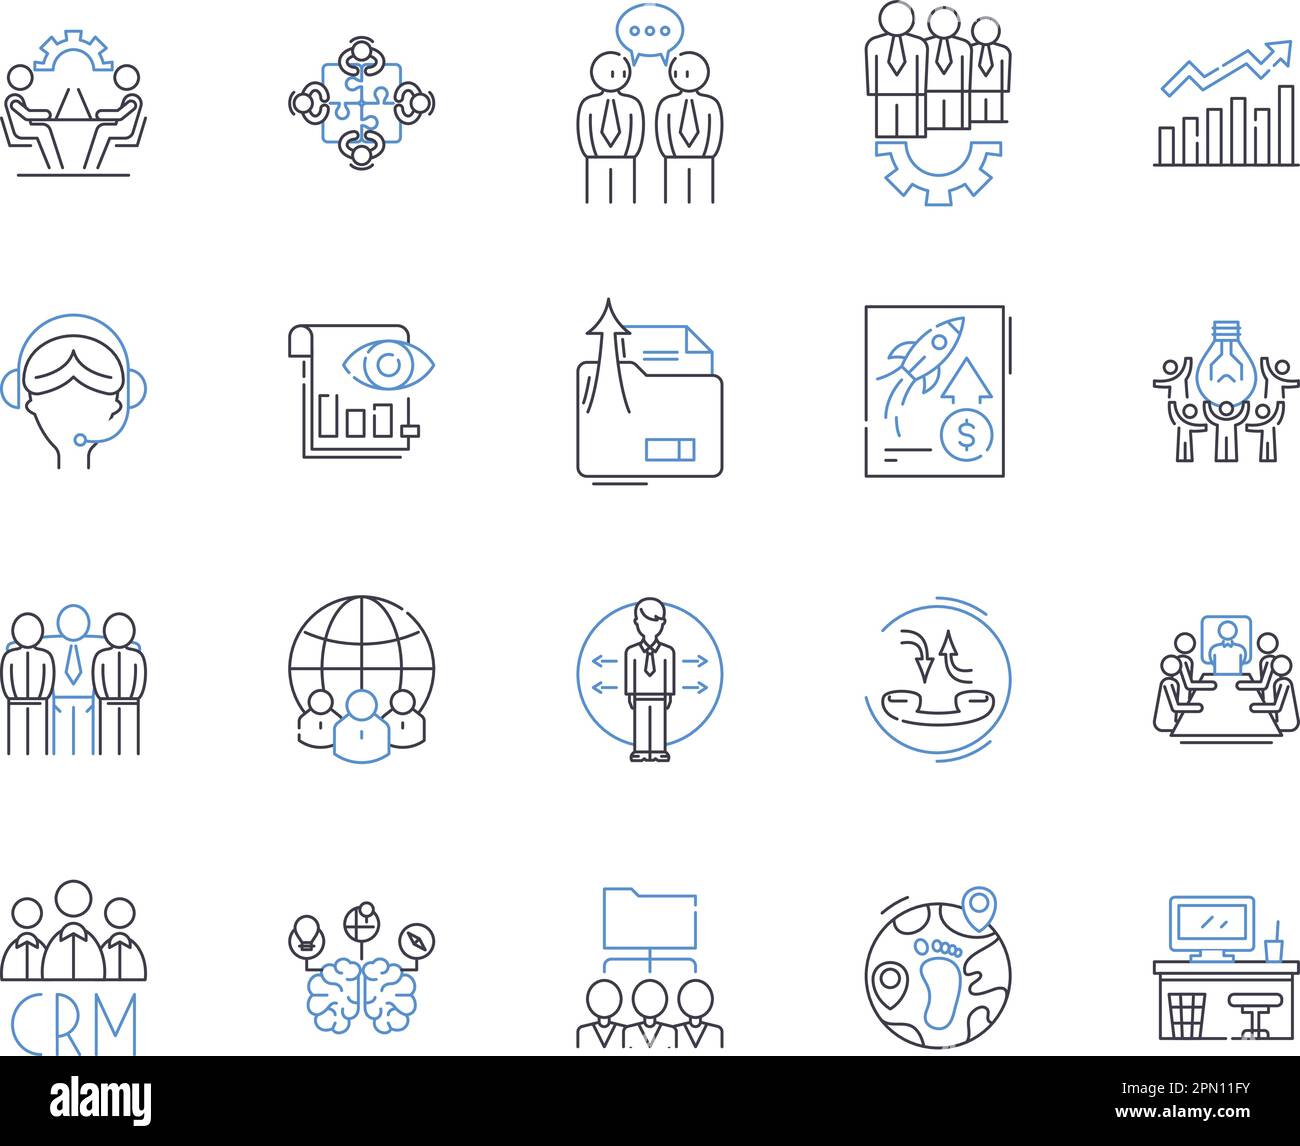 Department coworking outline icons collection. Deputy, Cowork, Counterpart, Collaborative, Groupwork, Division, Employees vector and illustration Stock Vector